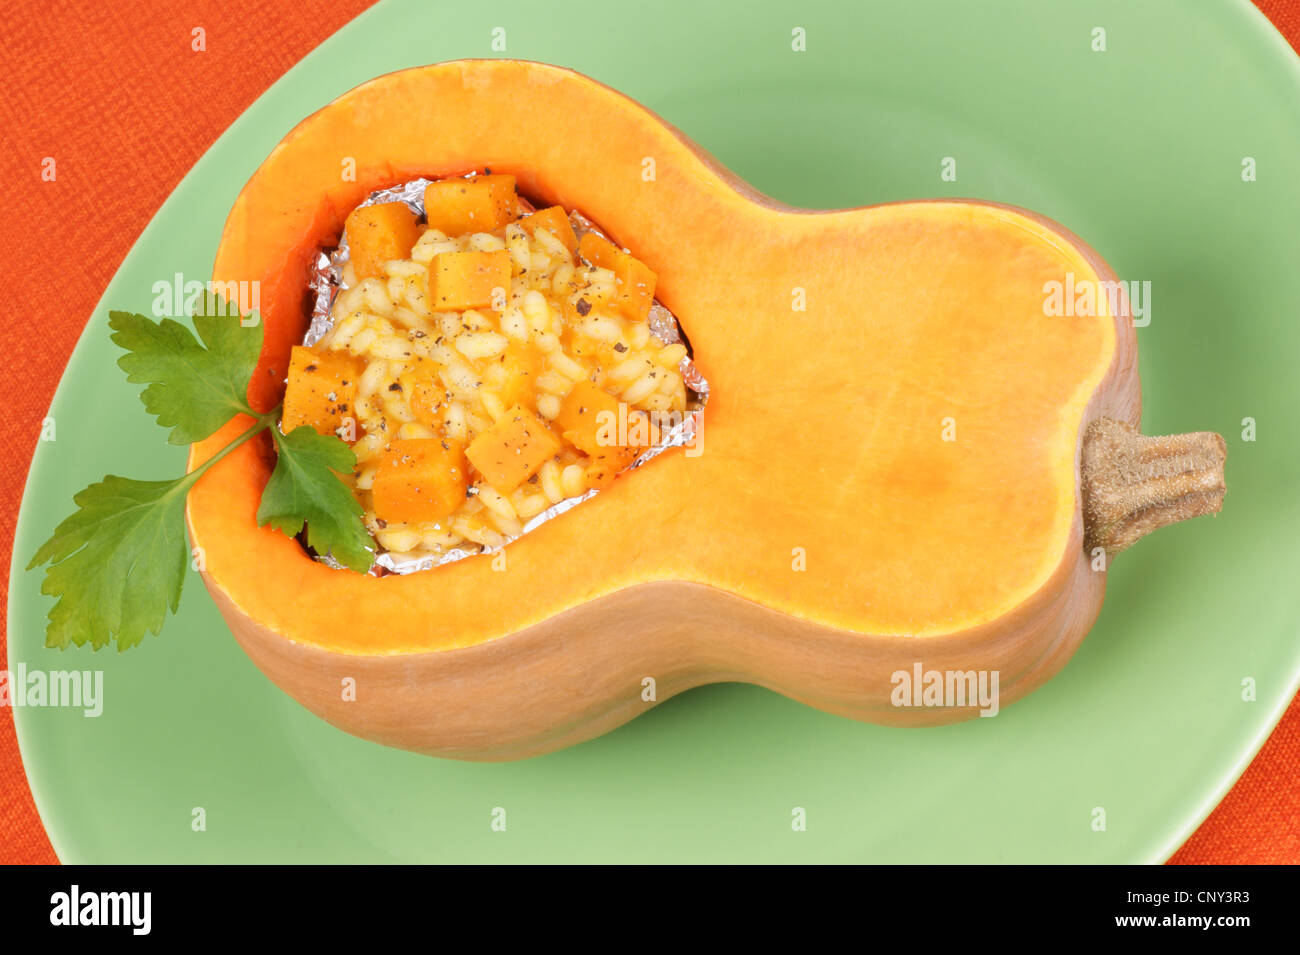 Half pumpkin filled with pumpkin risotto served on a green plate Stock Photo